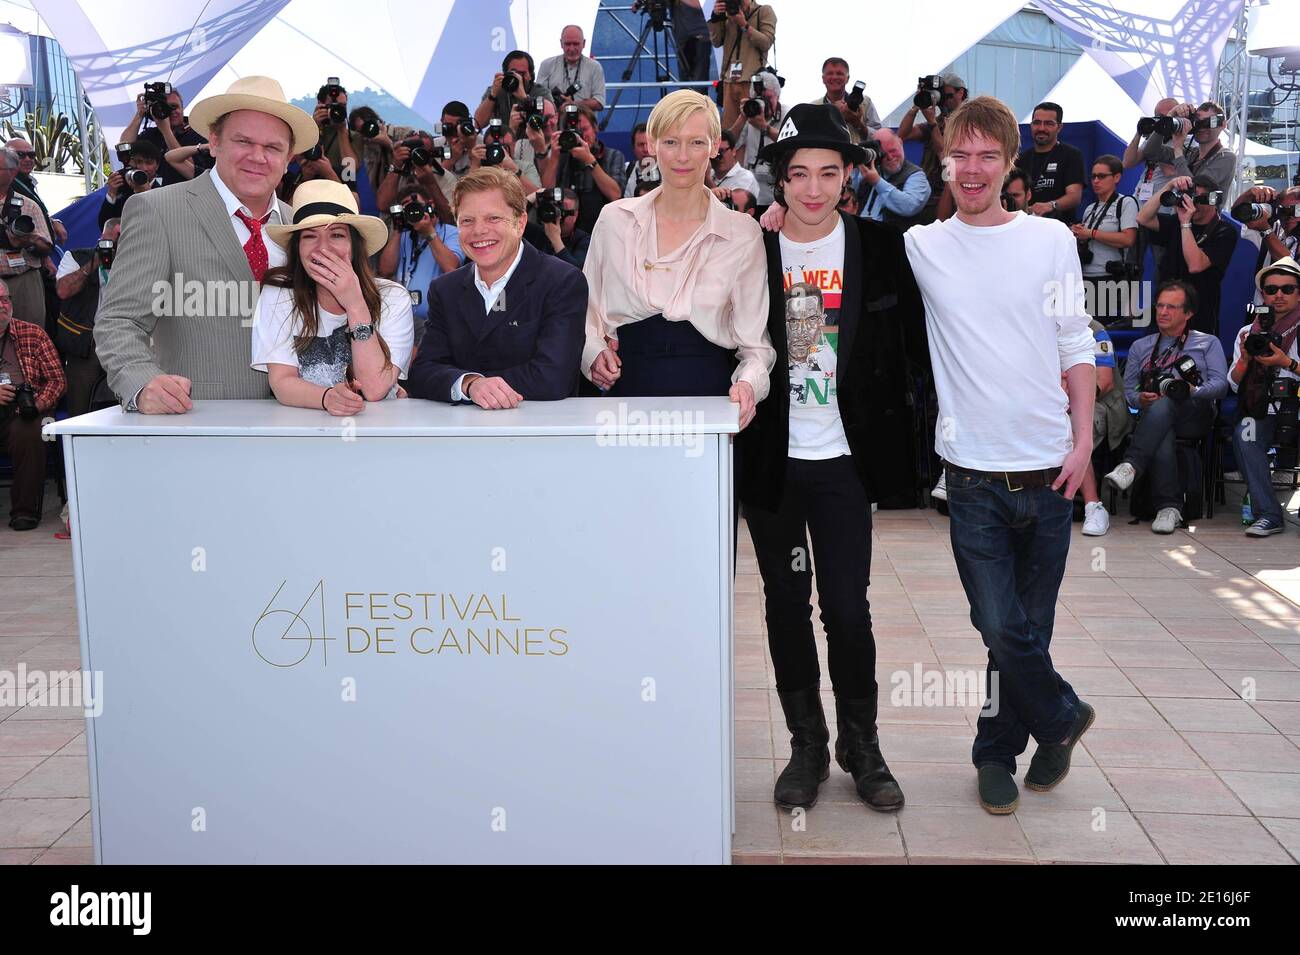 (L-R) John C. Reilly, director Lynne Ramsay, writer Rory Kinnear, Tilda Swinton, Ezra Miller and producer Luc Roeg at a photocall for the film 'We need to talk about Kevin' as part of the 64th Cannes International Film Festival, in Cannes, southern France on May 12, 2011. Photo by Hahn-Nebinger-Genin/ABACAPRESS.COM Stock Photo